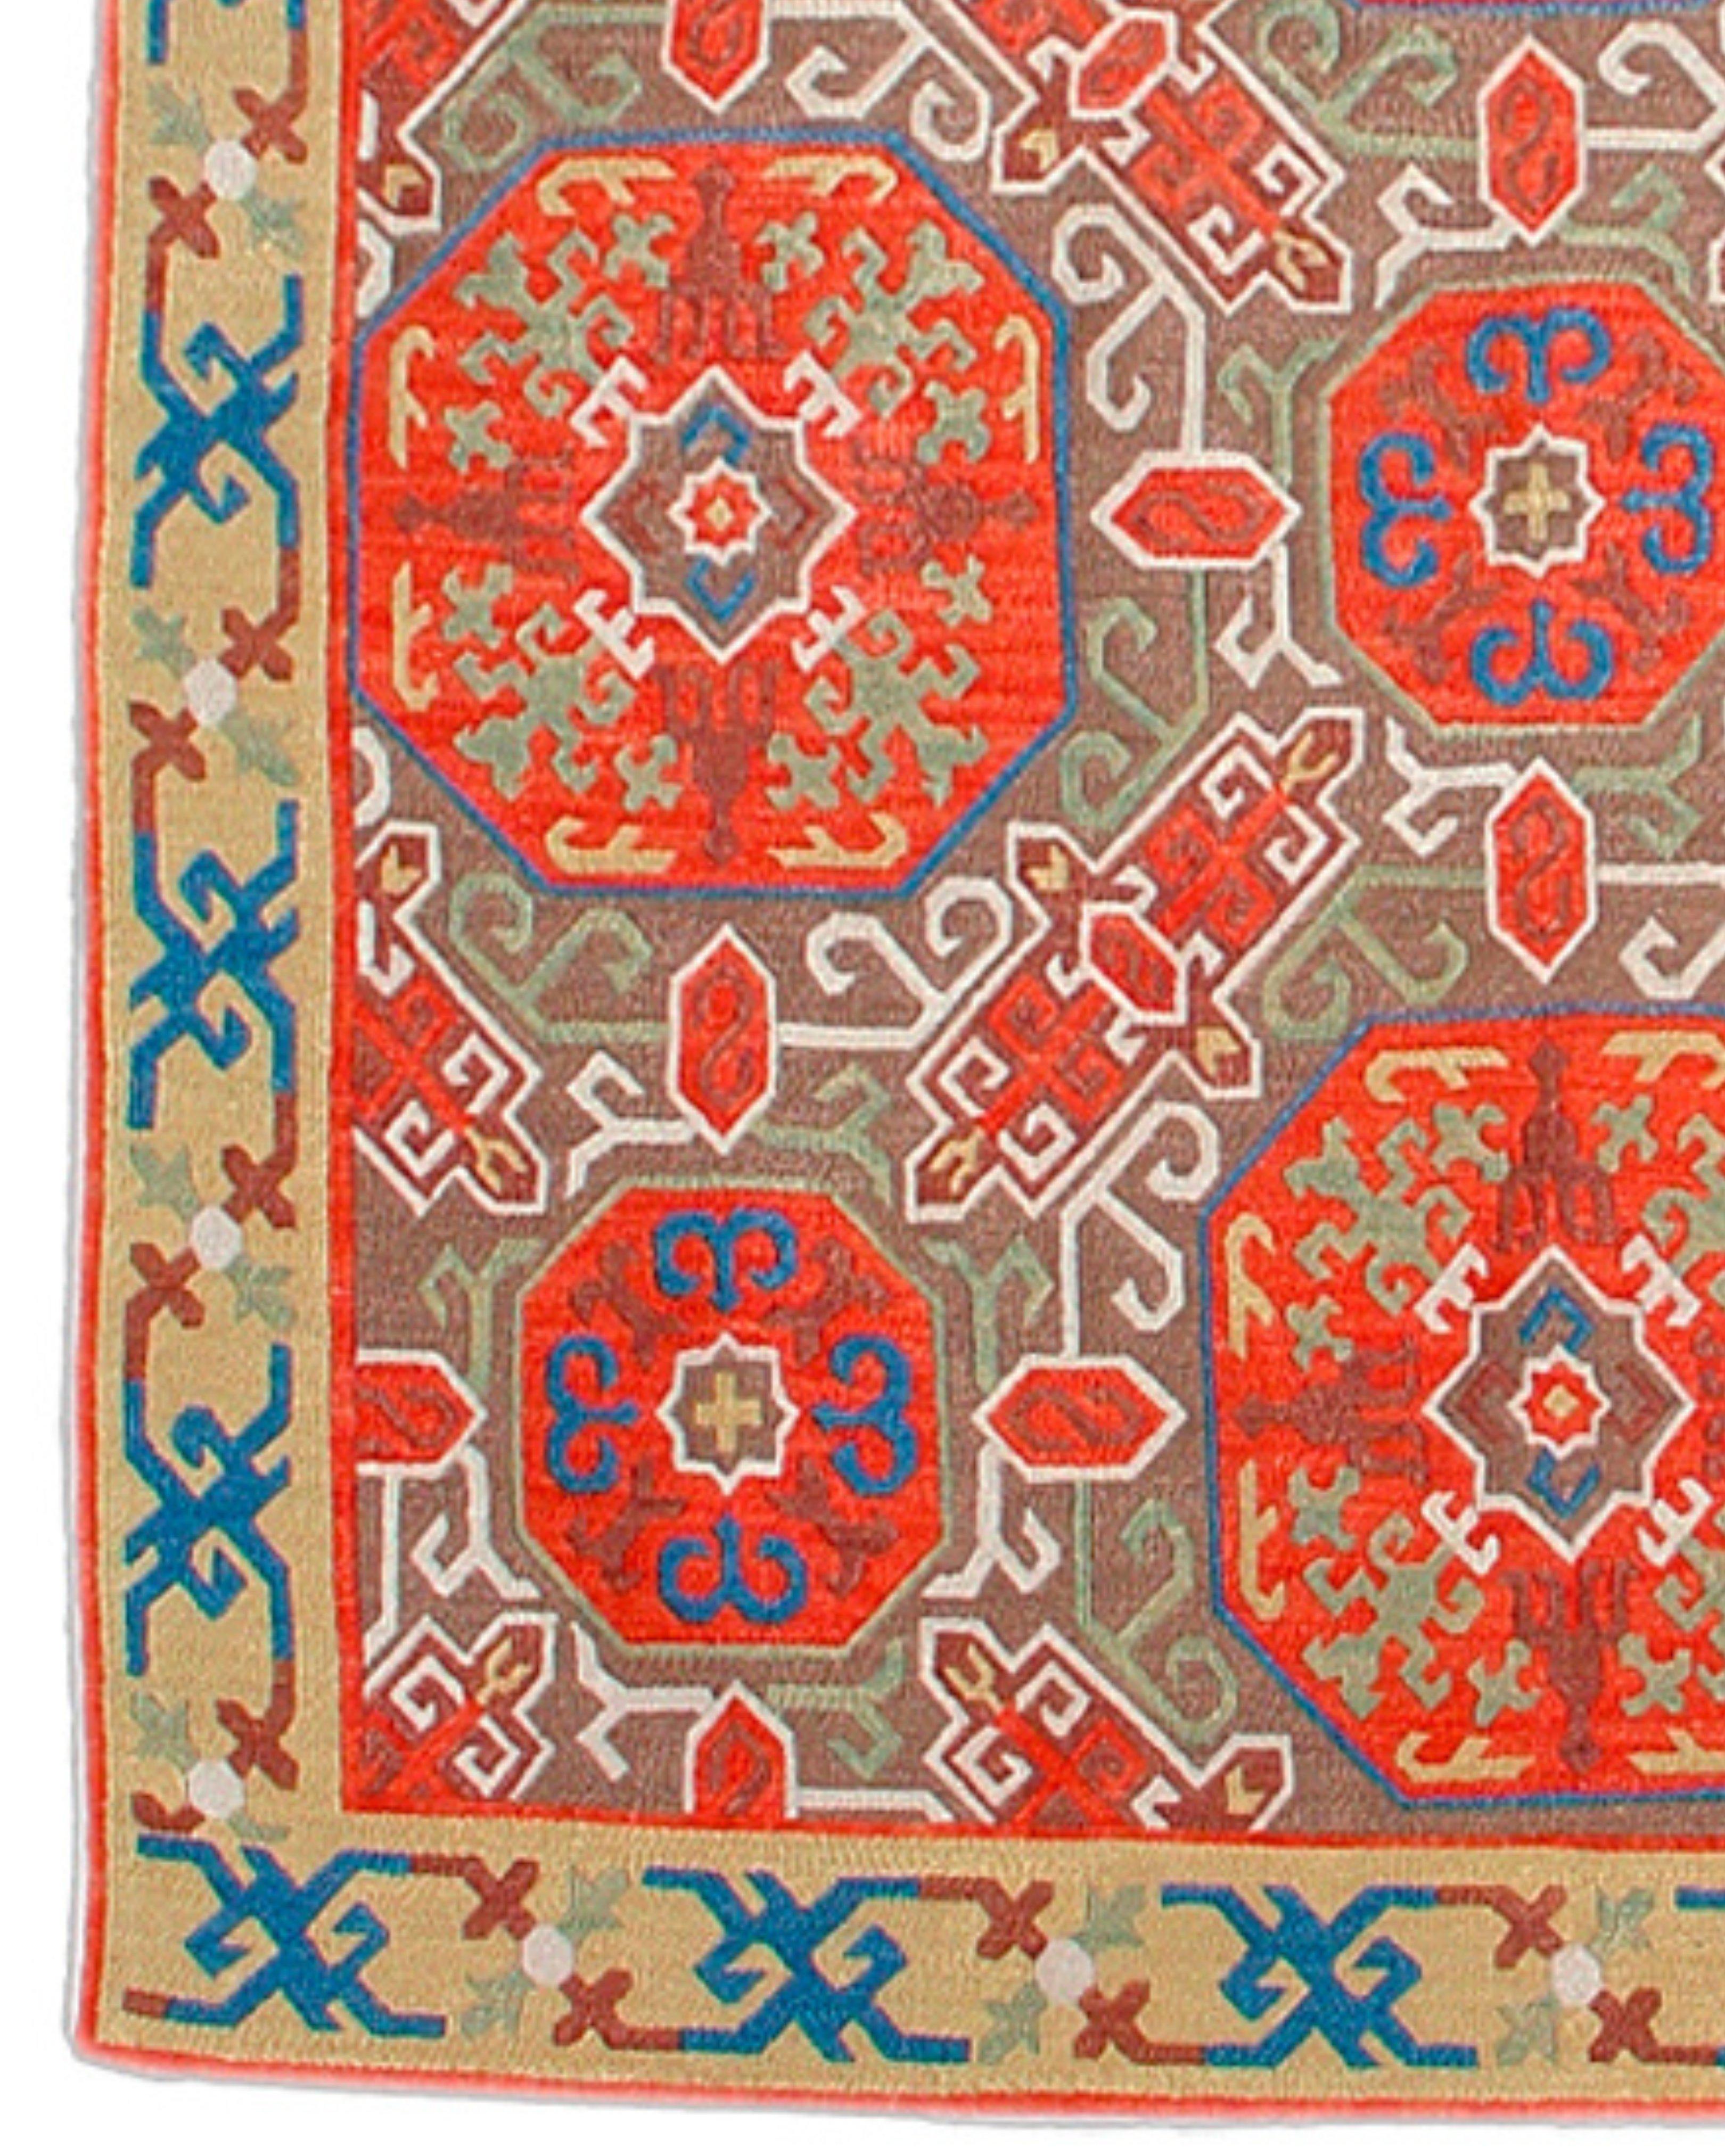 Embroidered Antique Armenian Silk Embroidery Rug, Late 20th Century  For Sale